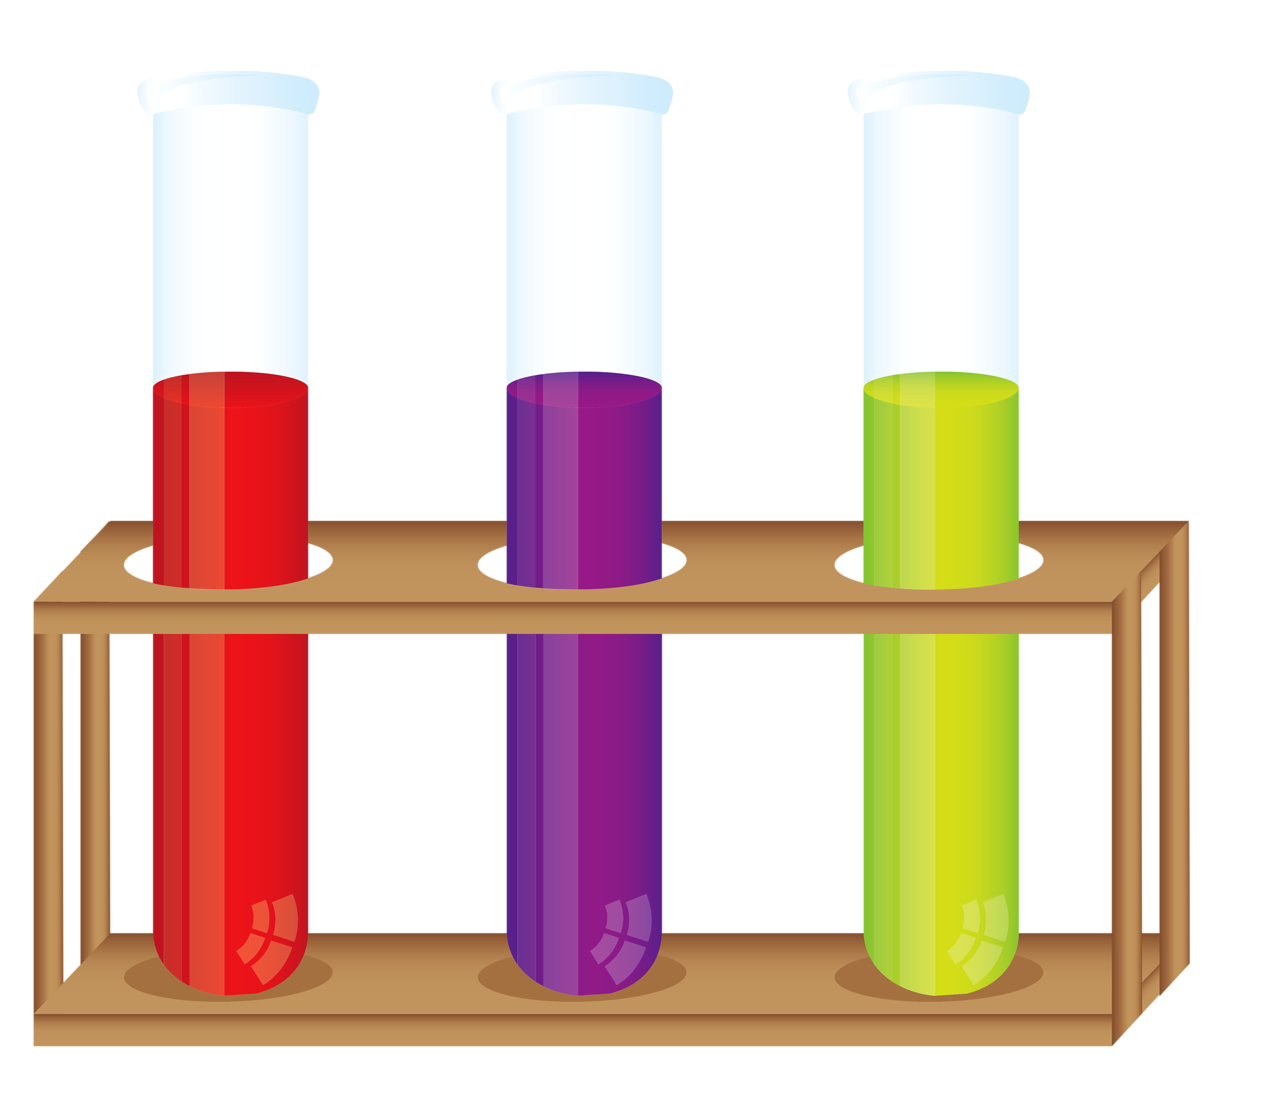 Goggles clipart test tube rack.  png album tubesmy